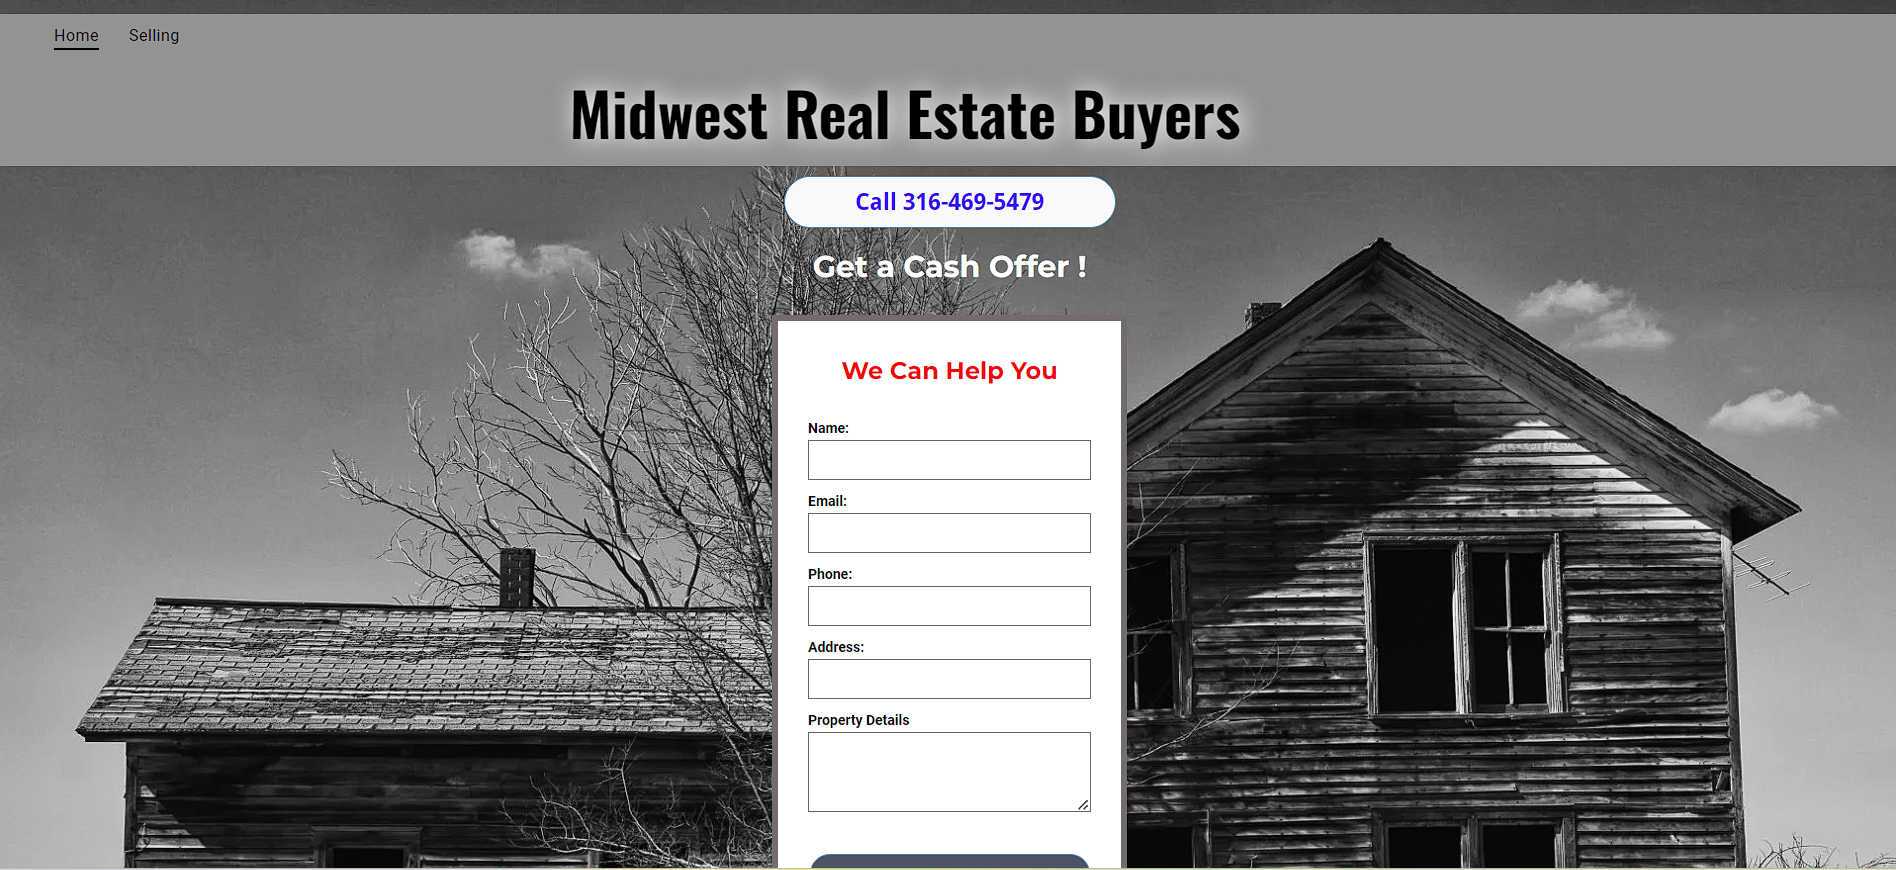 Midwest Real Estate Buyers Website